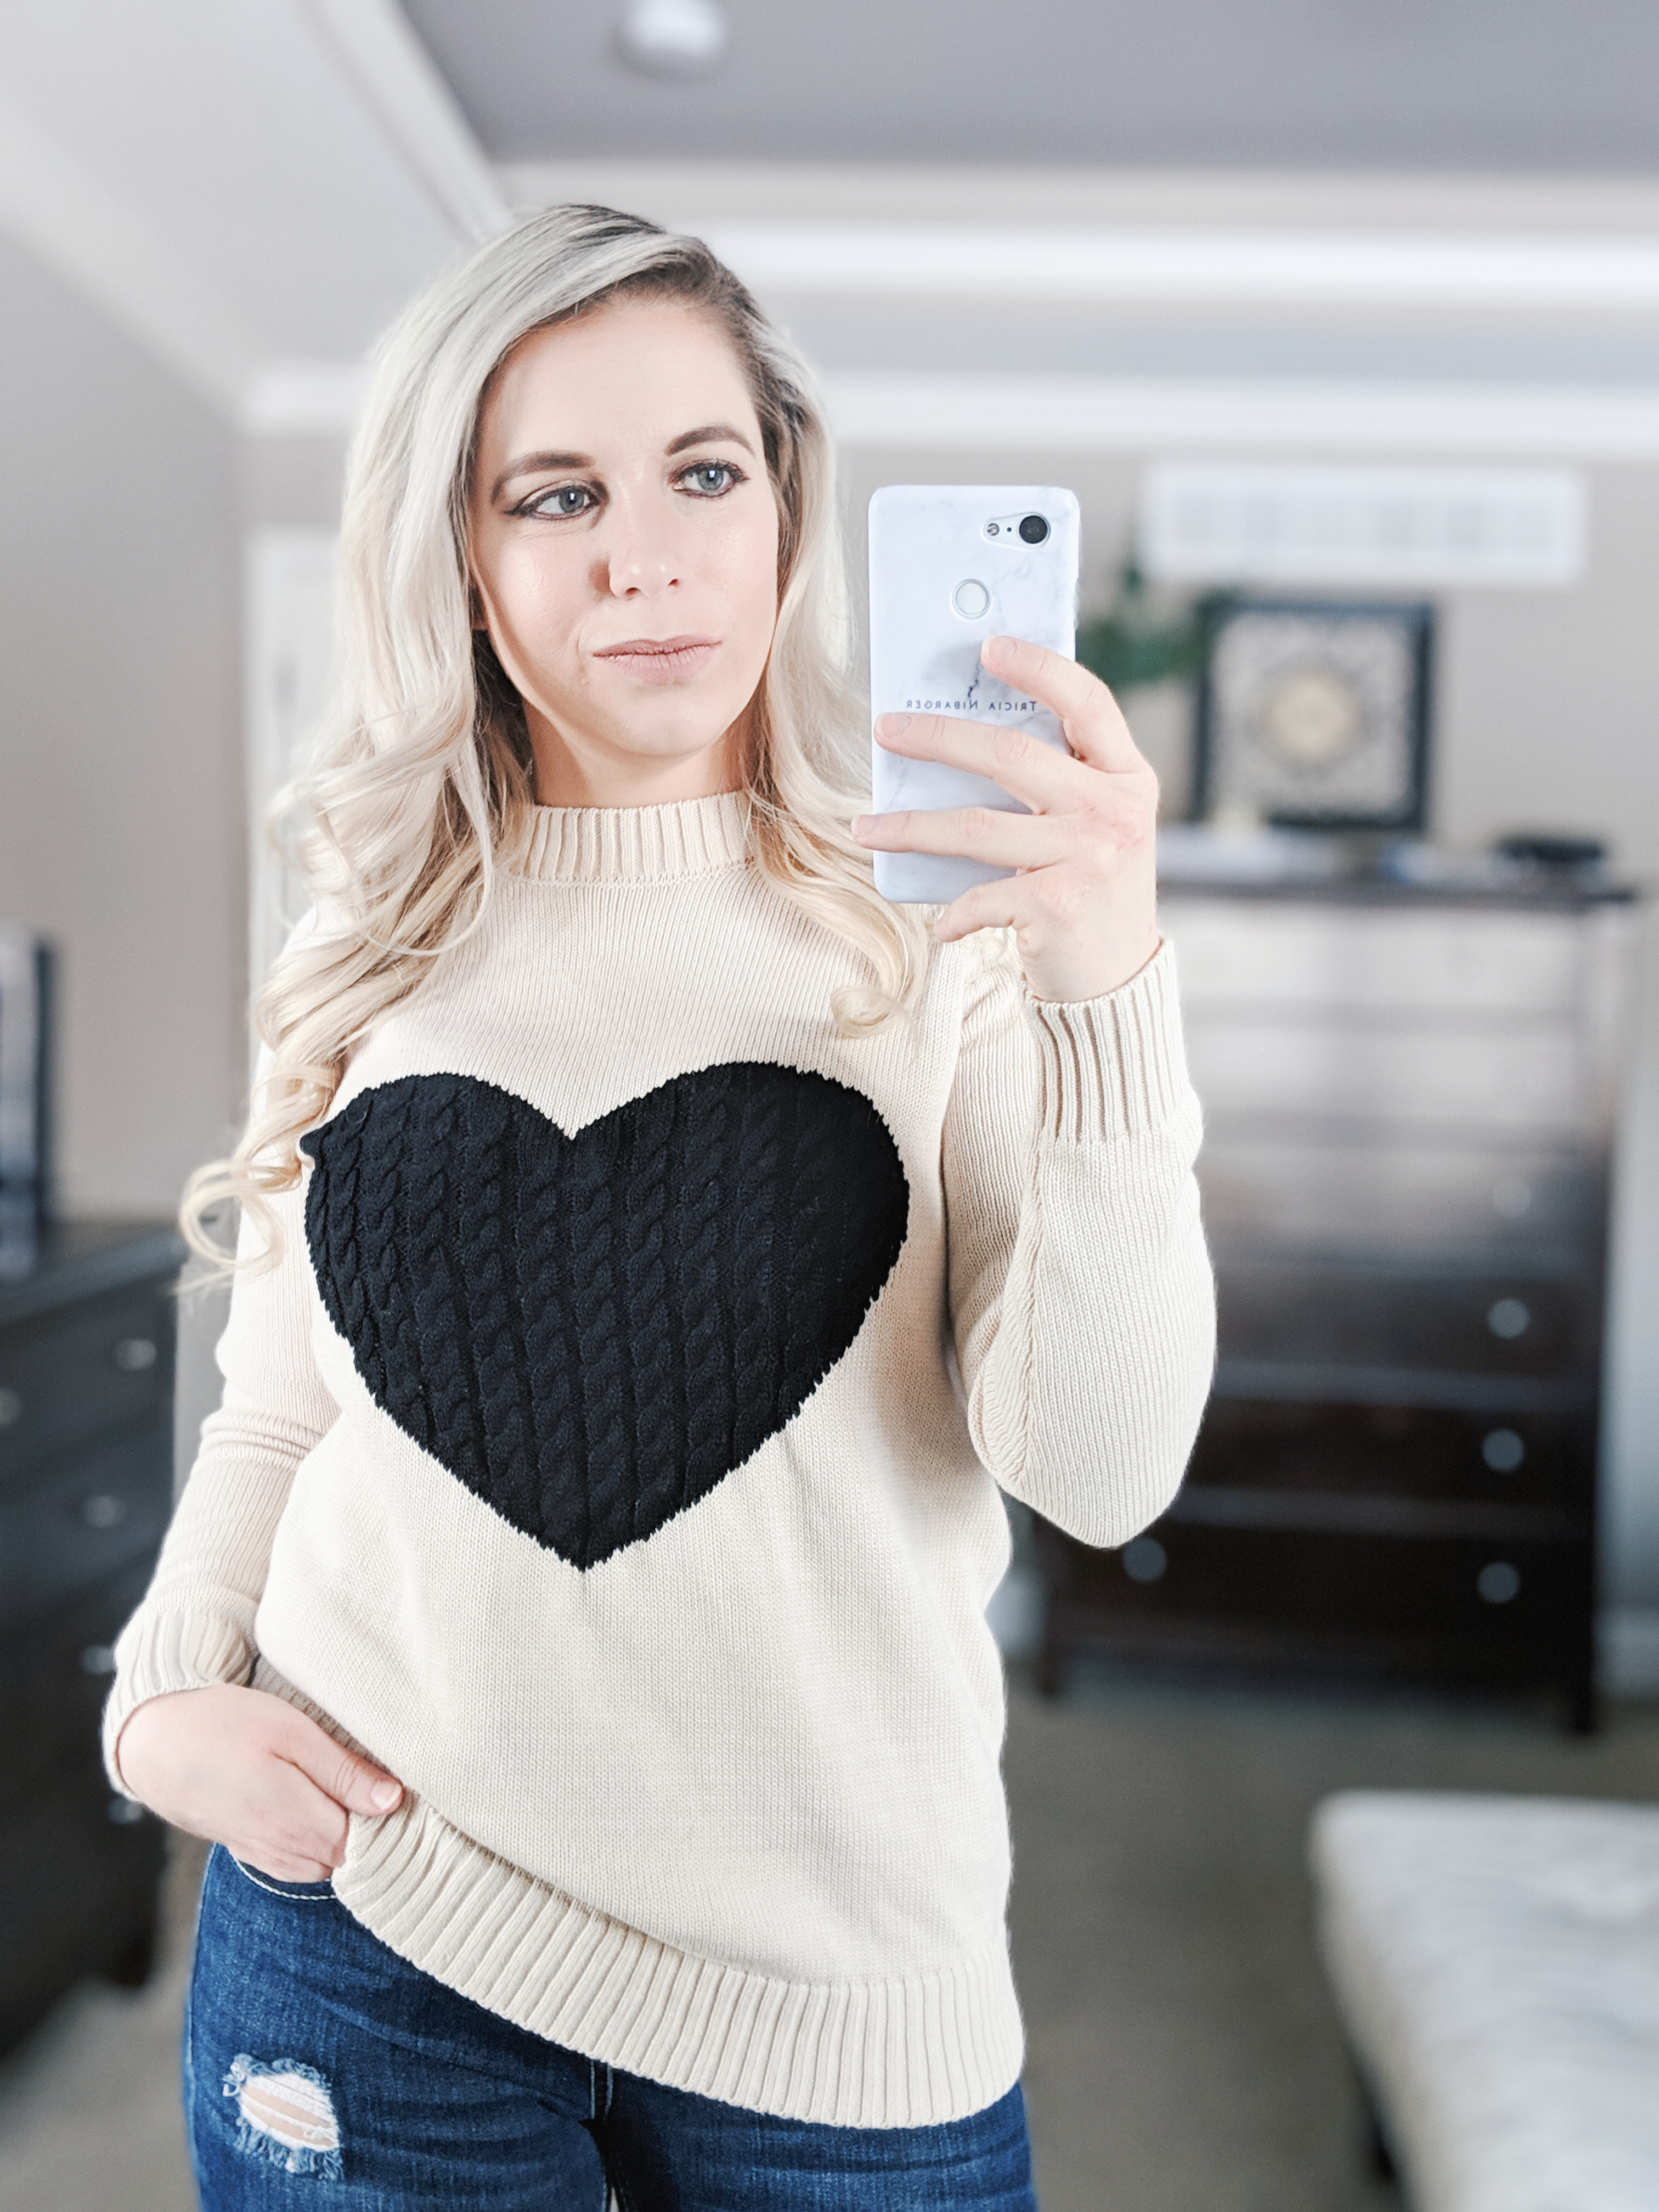 Cute Valentine's Day Outfit Ideas for Women: 5 affordable outfits from Amazon that will be perfect for Valentine's Day 2019! This fashion blogger try-on haul includes sexy Valentine's Day outfits, heart sweaters, heart pom cardigans, and more. Get the cutest affordable fashion for Valentine's Day with these inspiring looks!